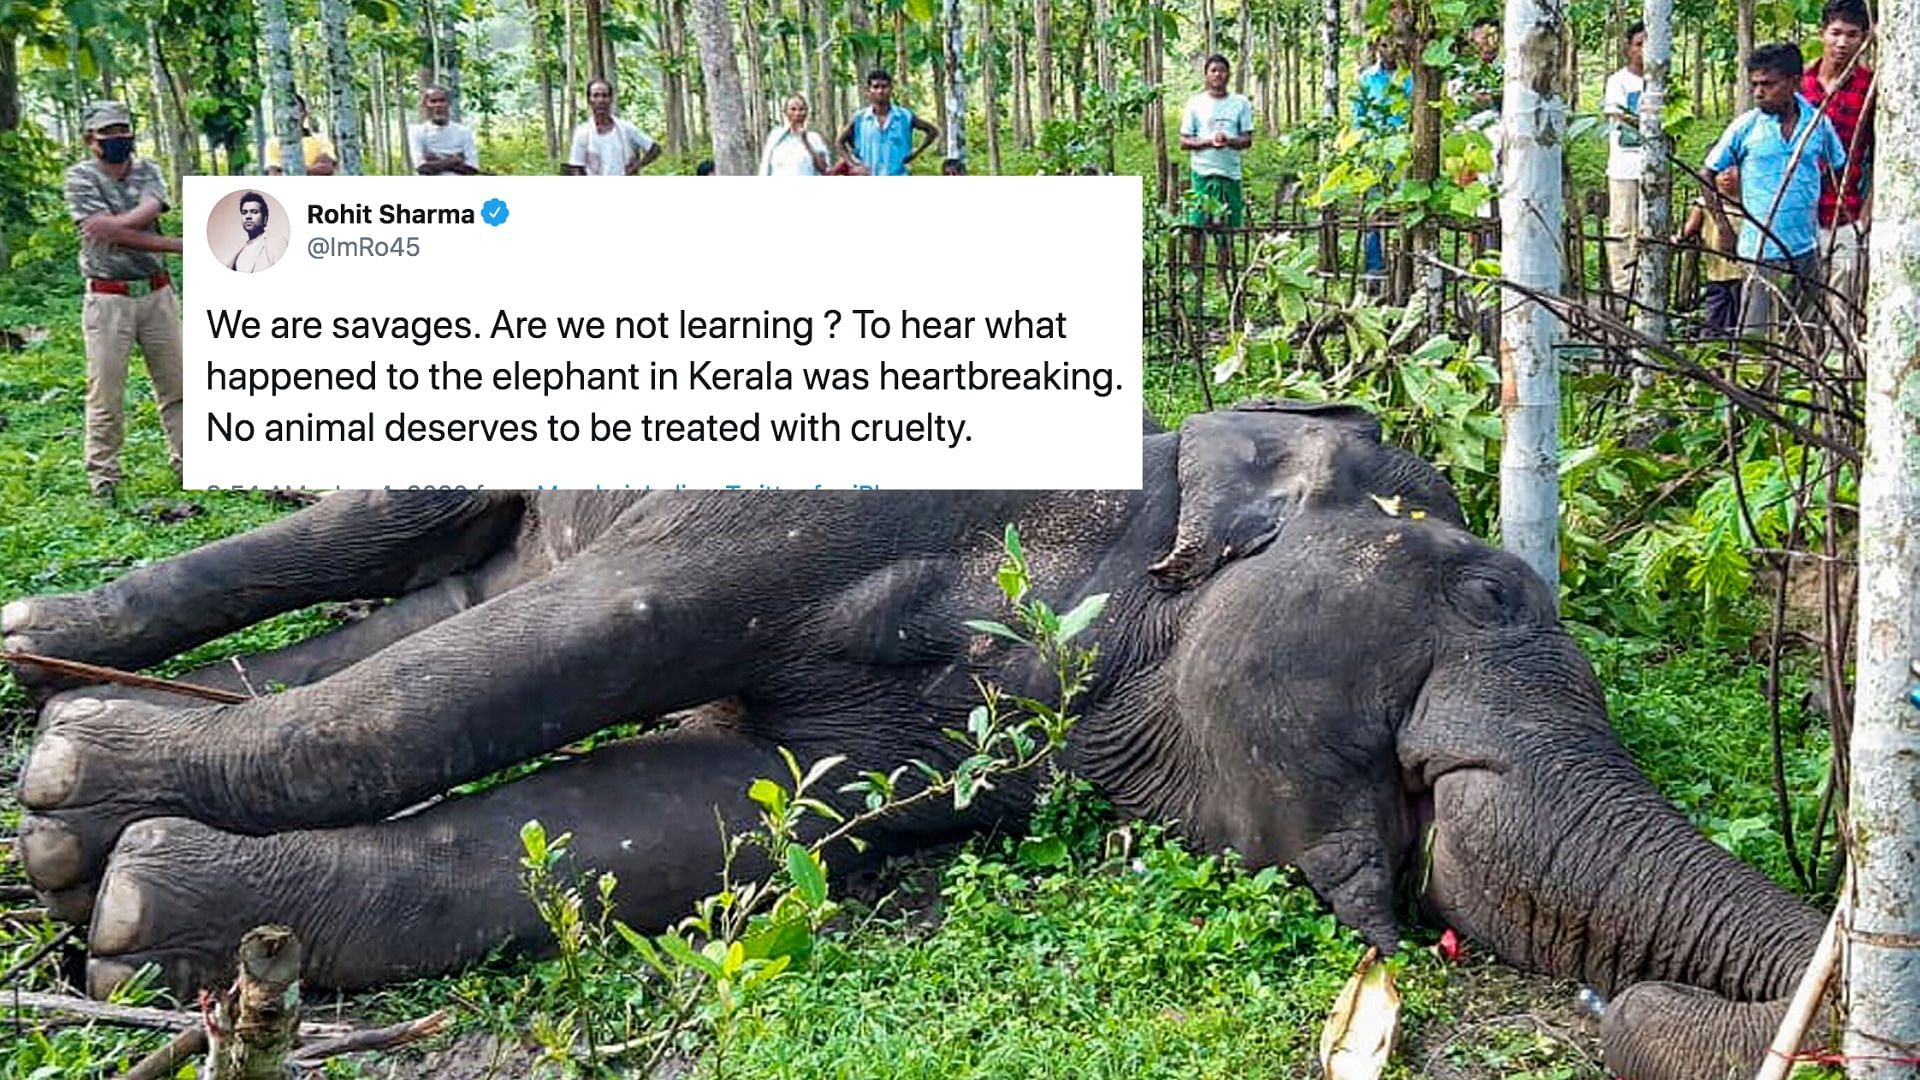 Rohit Sharma said it was heartbreaking to hear about the death of a pregnant elephant in Kerala, adding that no animal deserves to be treated with cruelty.